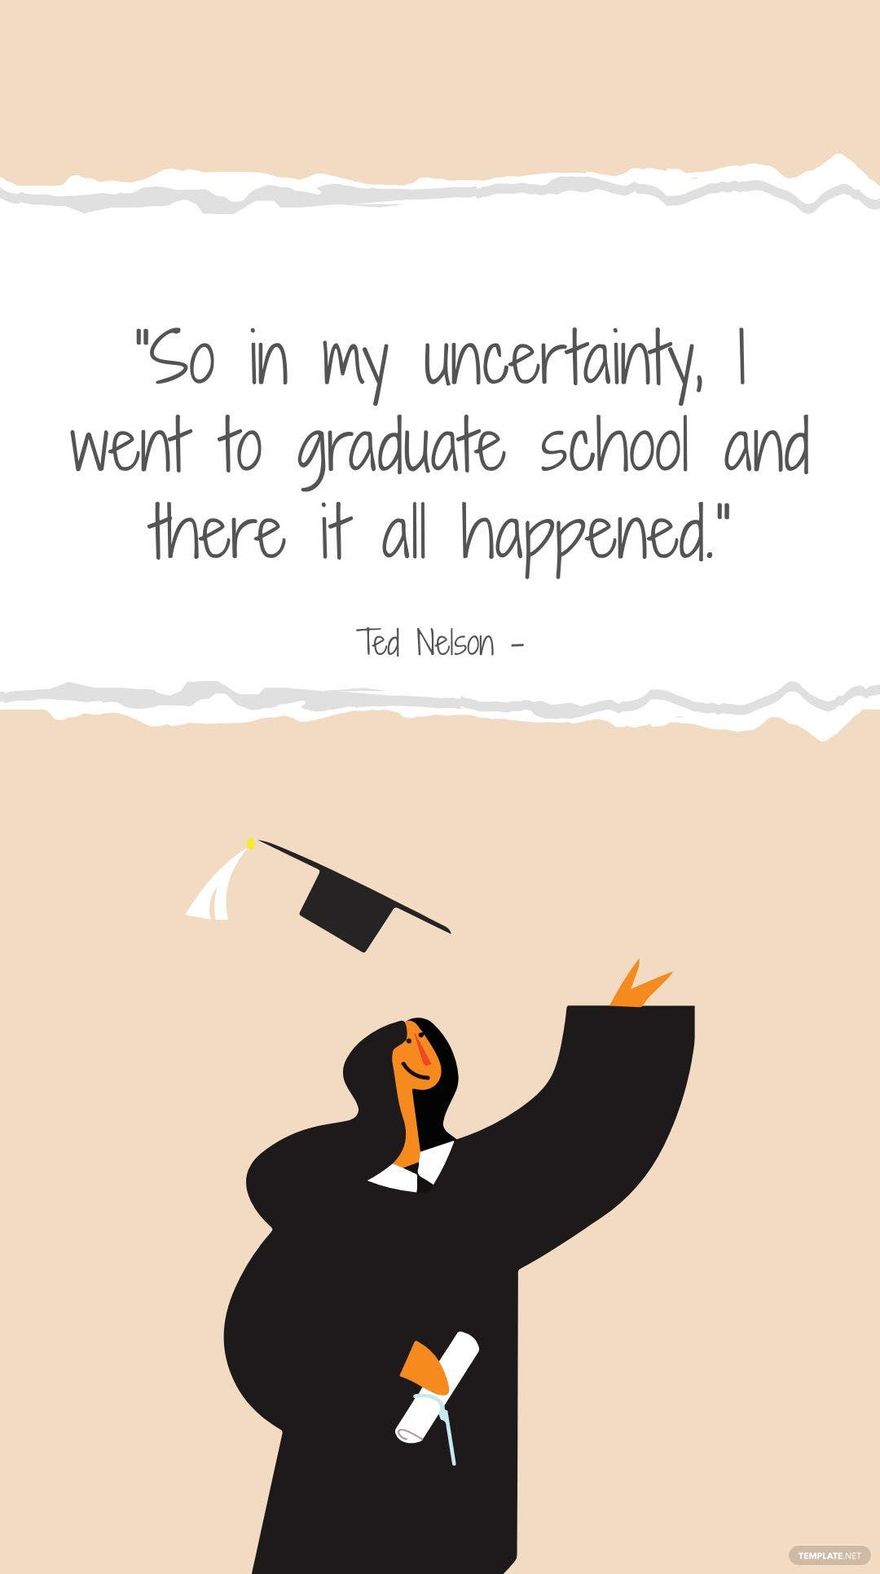 Ted Nelson - So in my uncertainty, I went to graduate school and there ...